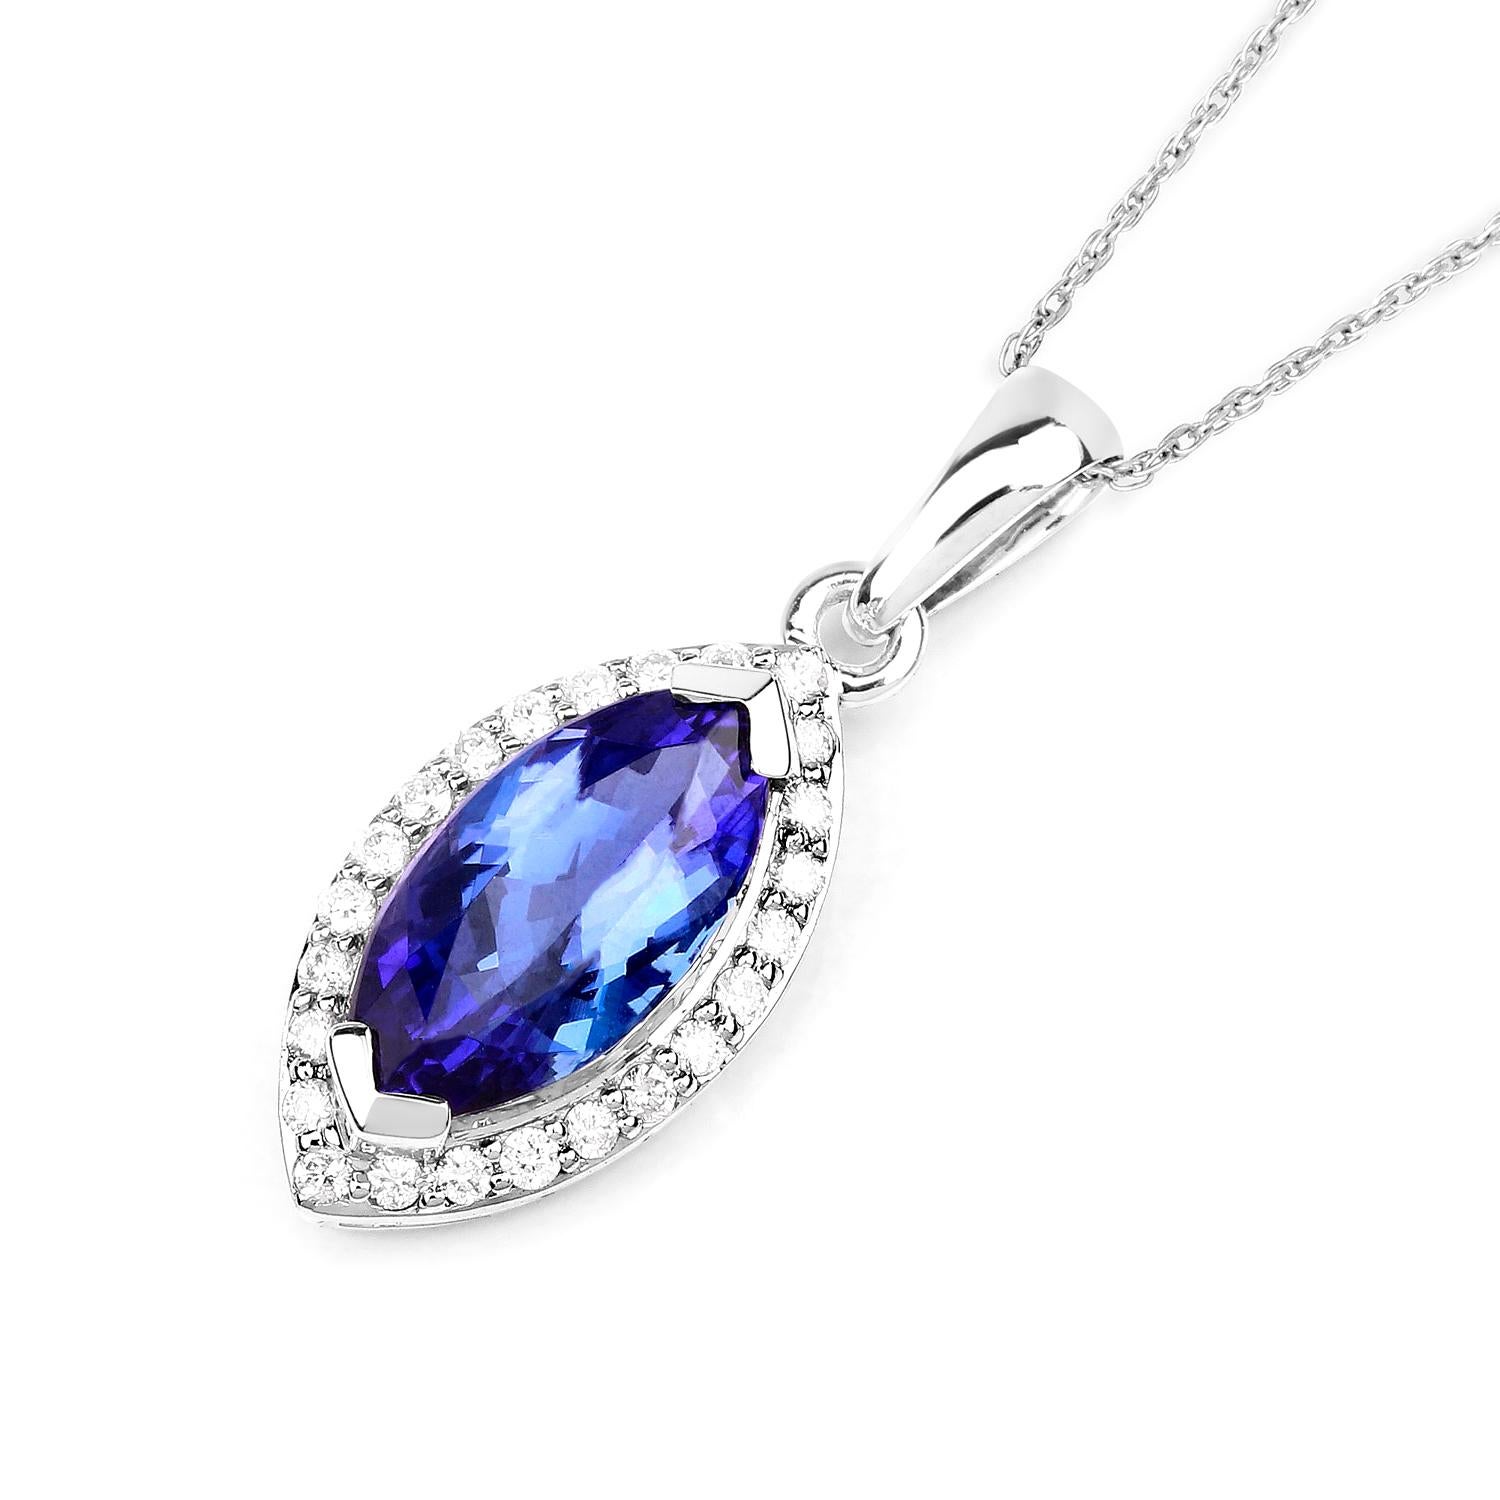 Marquise Cut Tanzanite Necklace With Diamonds 2.07 Carats 14K White Gold For Sale